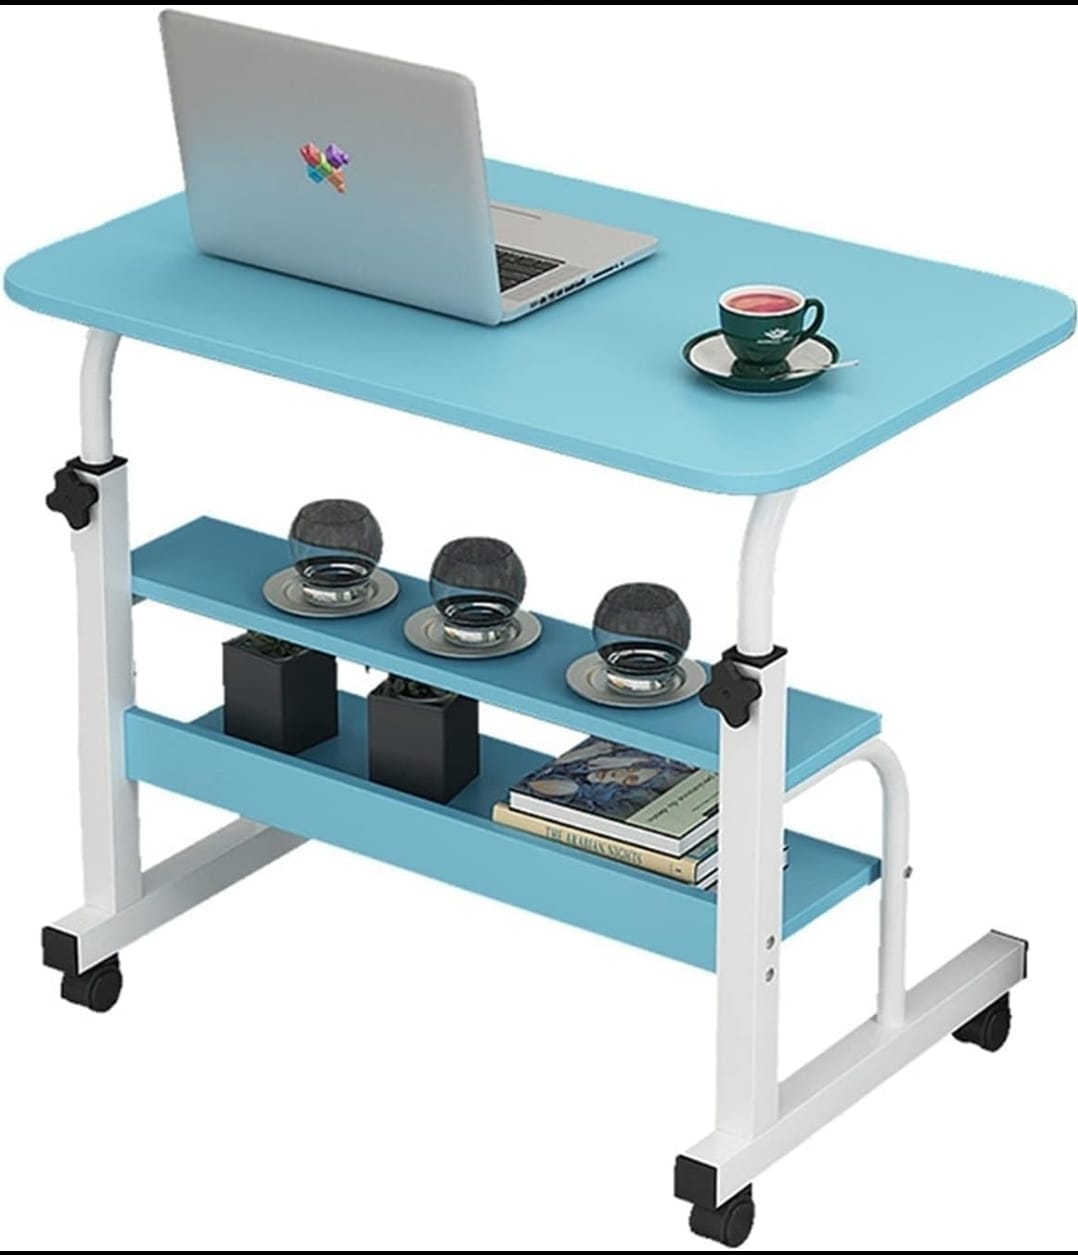 Bedside Laptop Table Desktop, Easy To Move, Multifunctional Portable, For Living Room Room Office